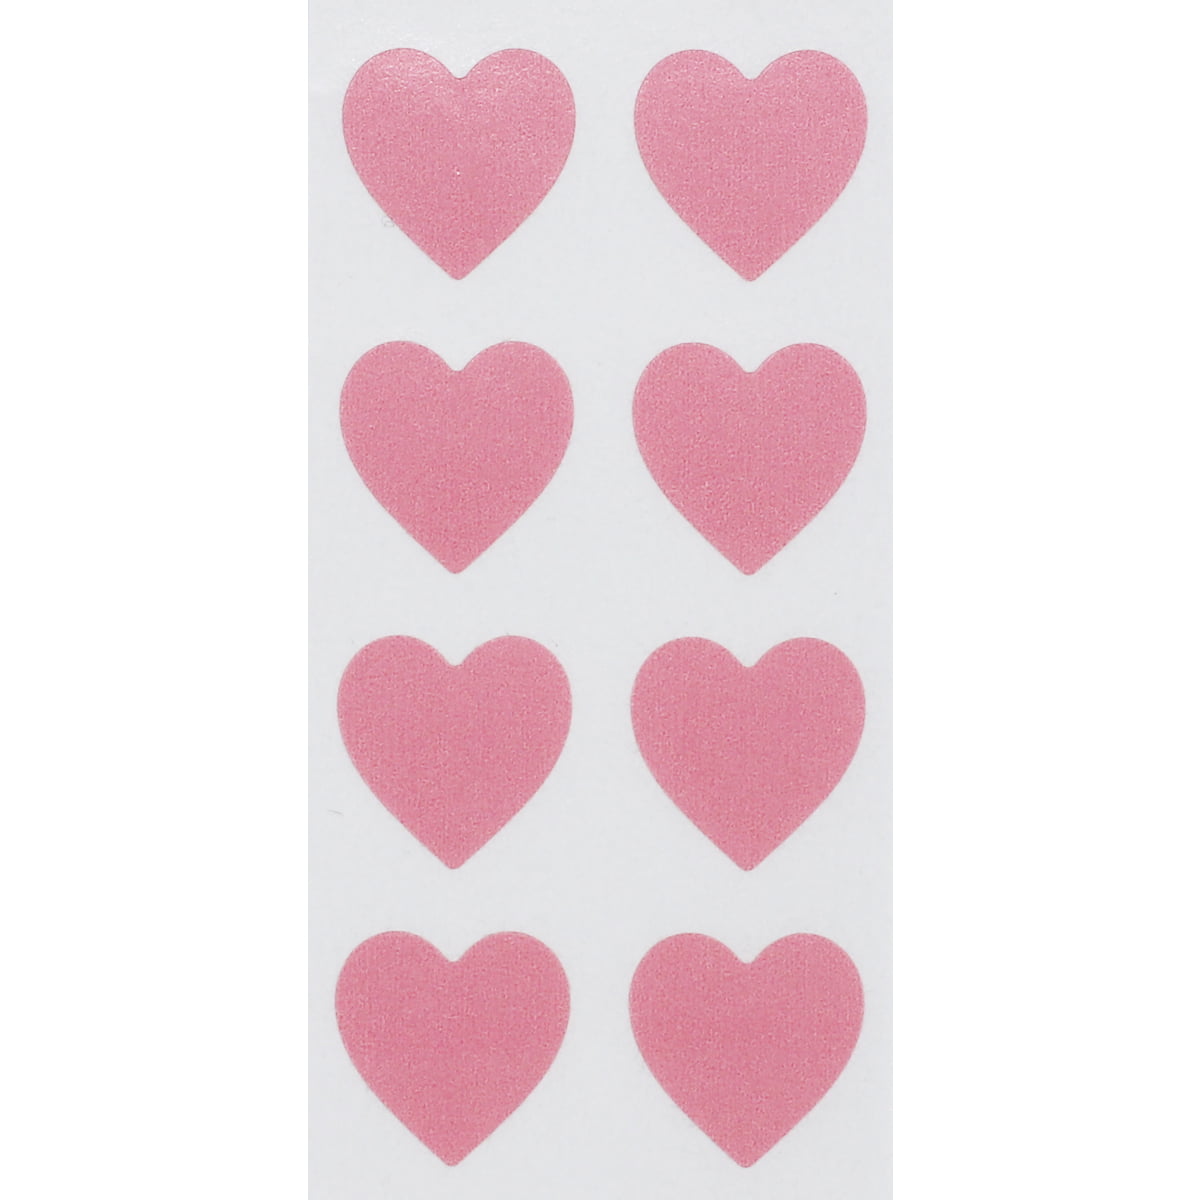 Blue Heart Stickers, 0.5 inch Wide, 1000 Labels on A Roll